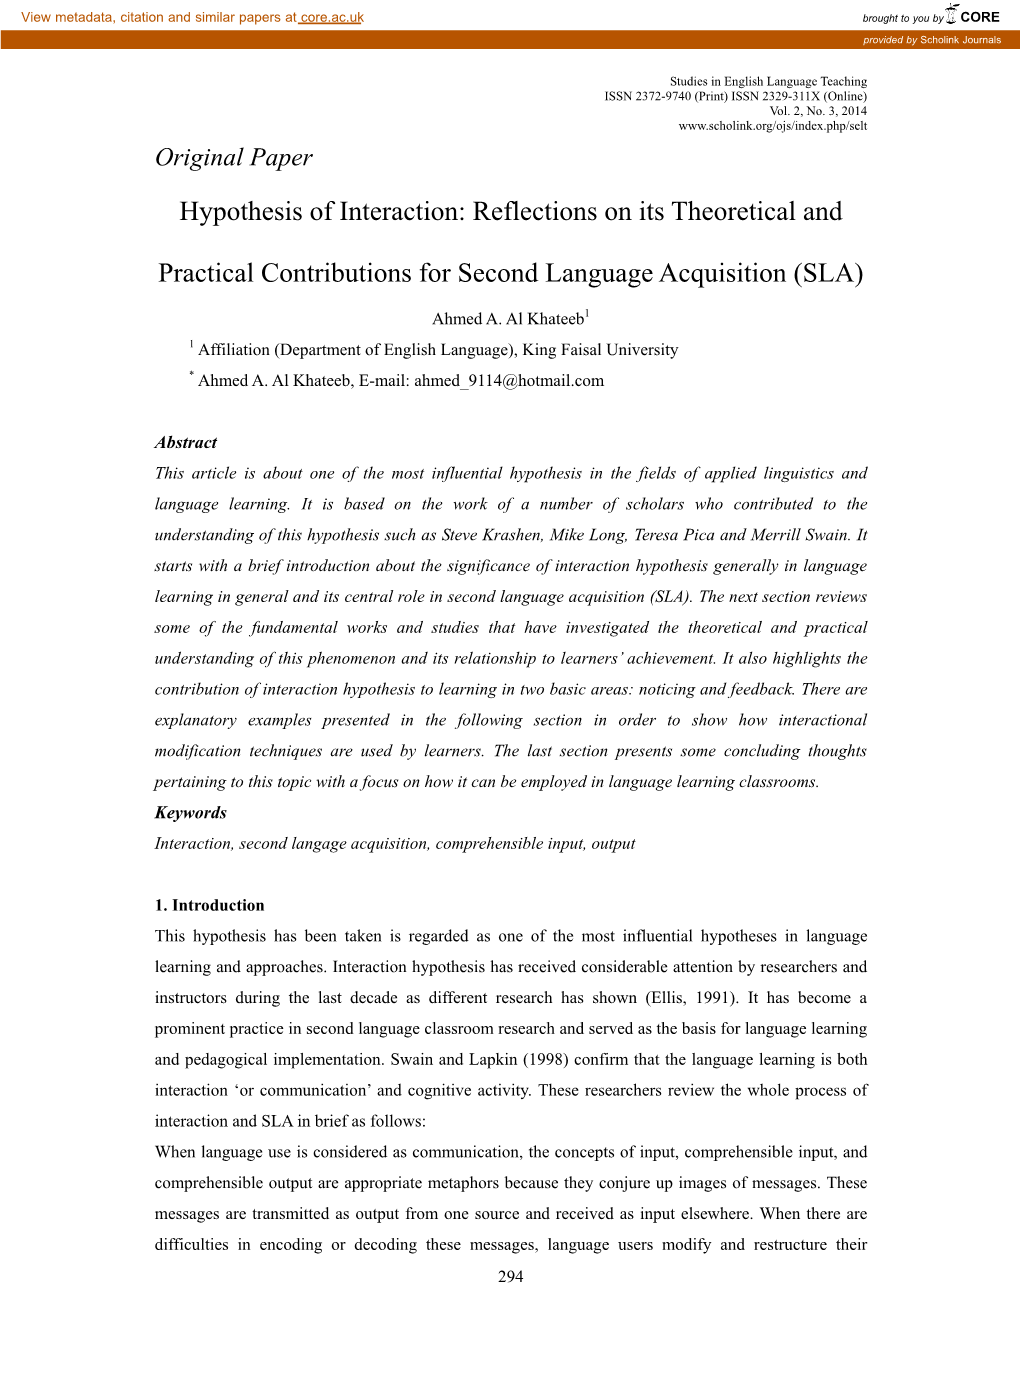 Hypothesis of Interaction: Reflections on Its Theoretical And